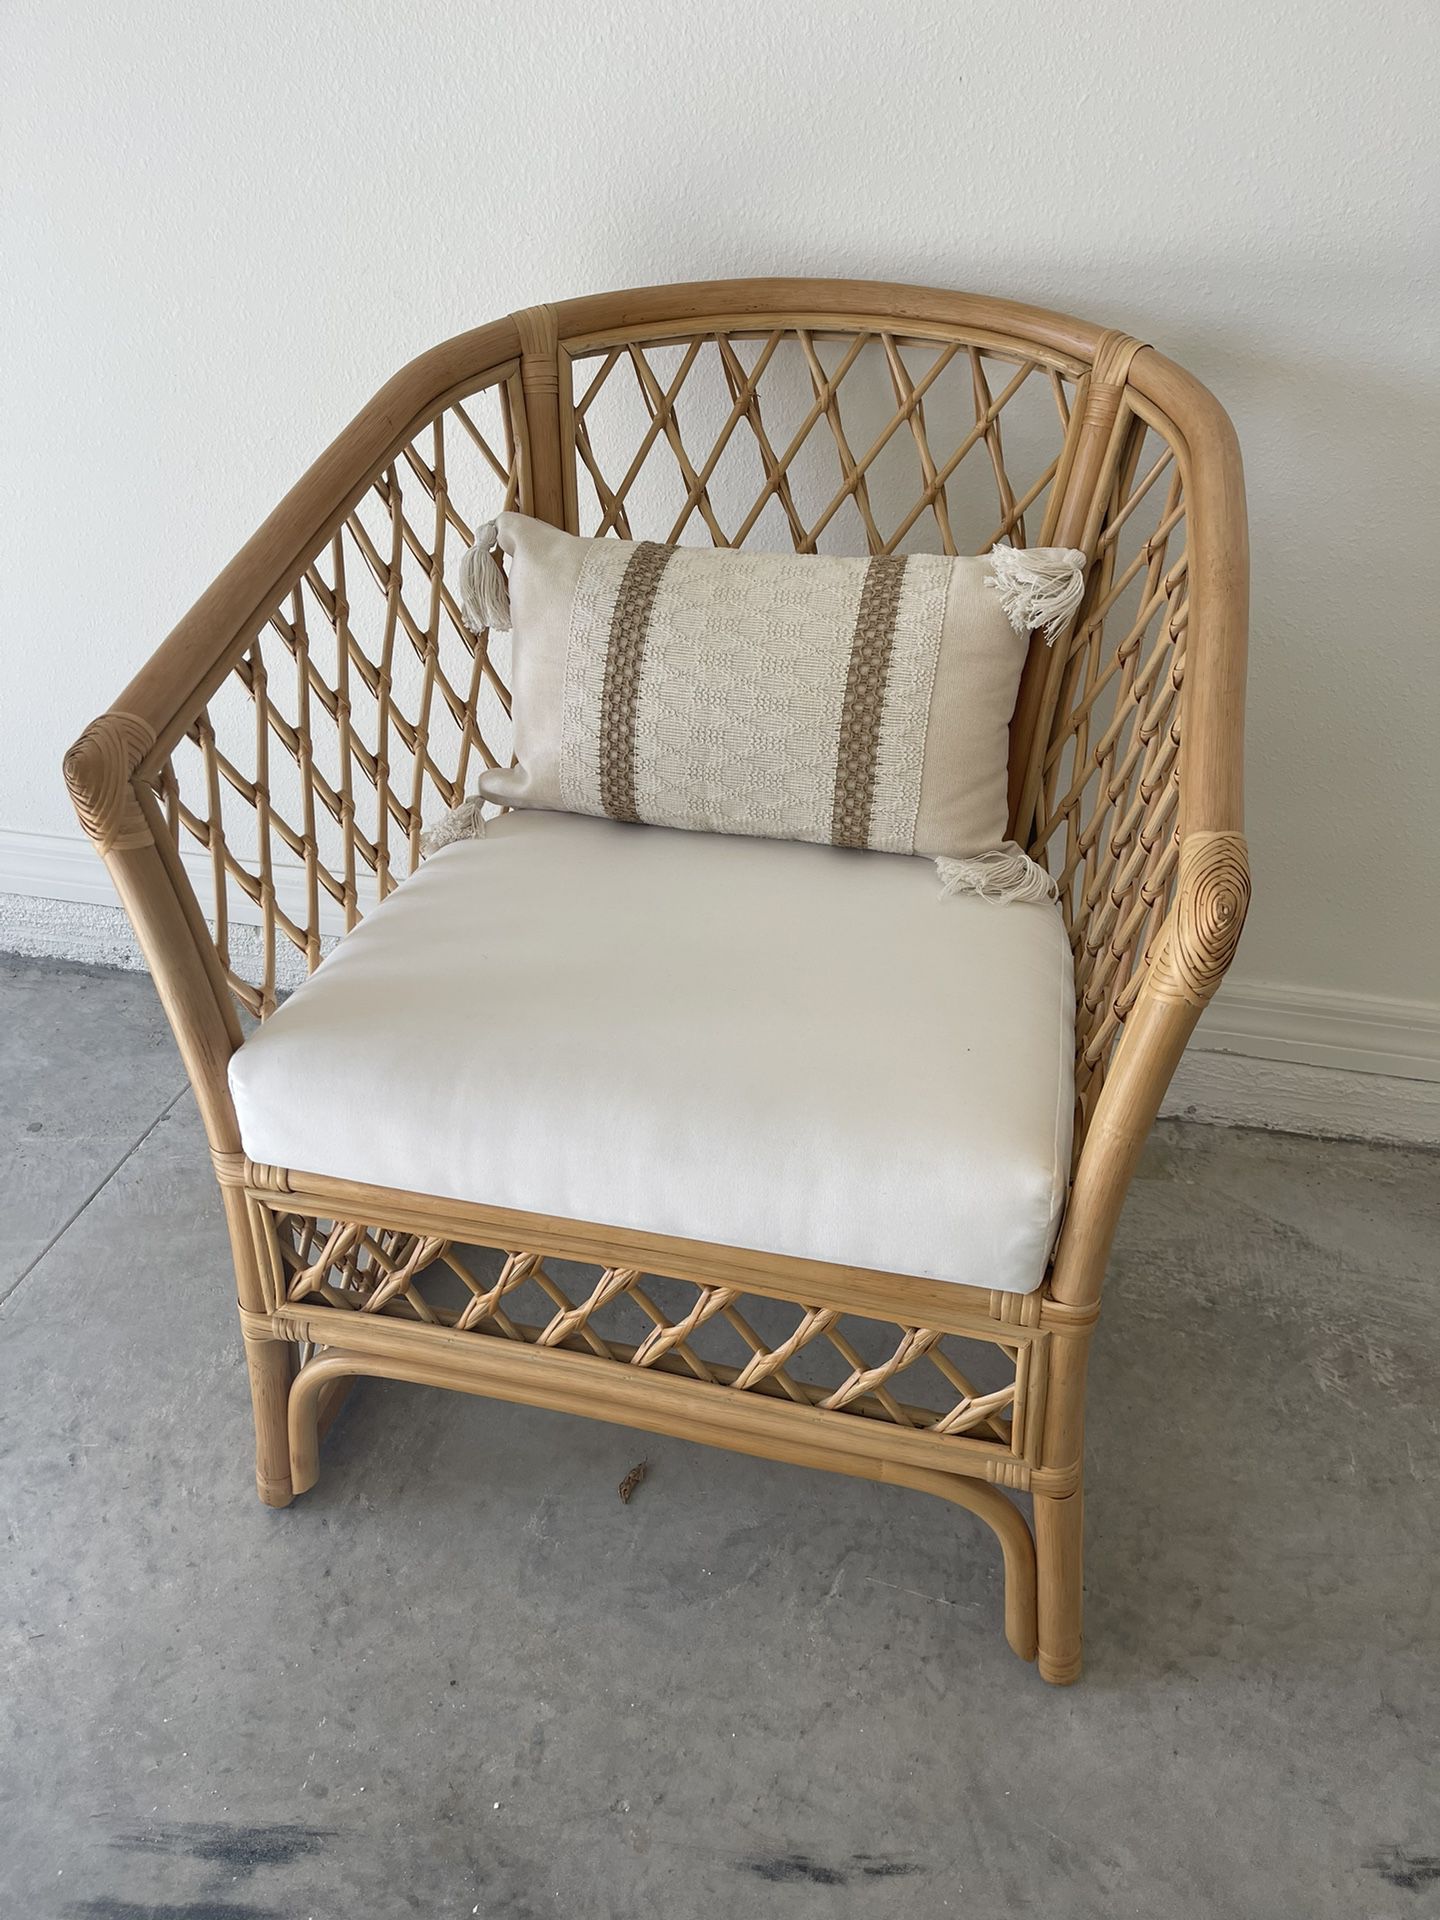 Rattan Decor Chair With Cushion - Used For Staging Purposes Only 